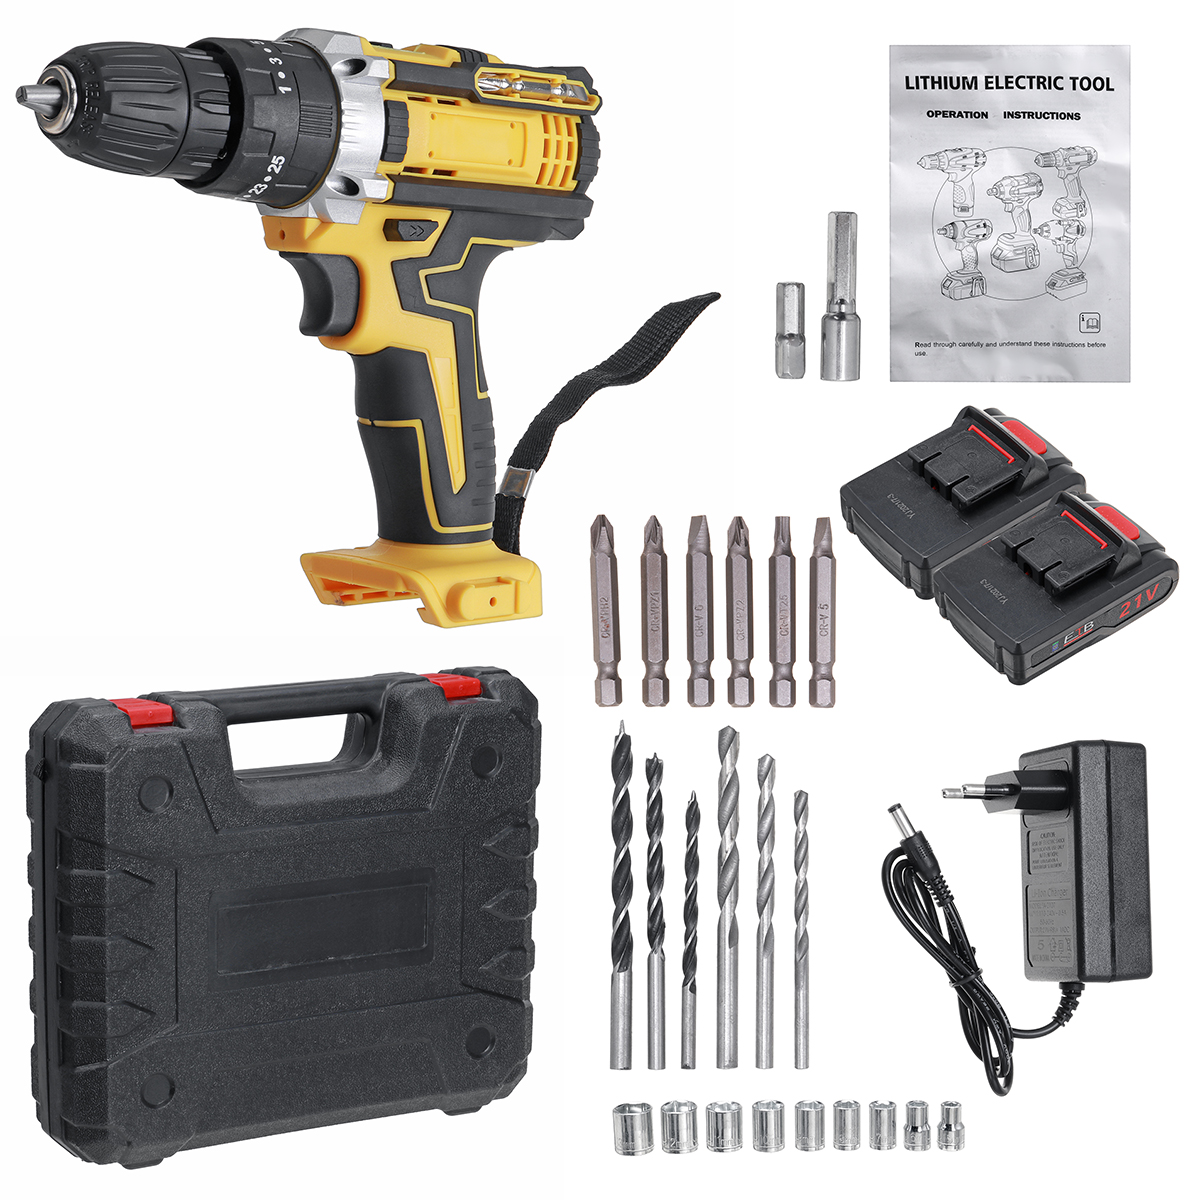 18500mAh-10mm-Cordless-Impact-Drill-Rechargeable-2-Speeds-LED-Electric-Drill-W-12pcs-Battery-1910512-14